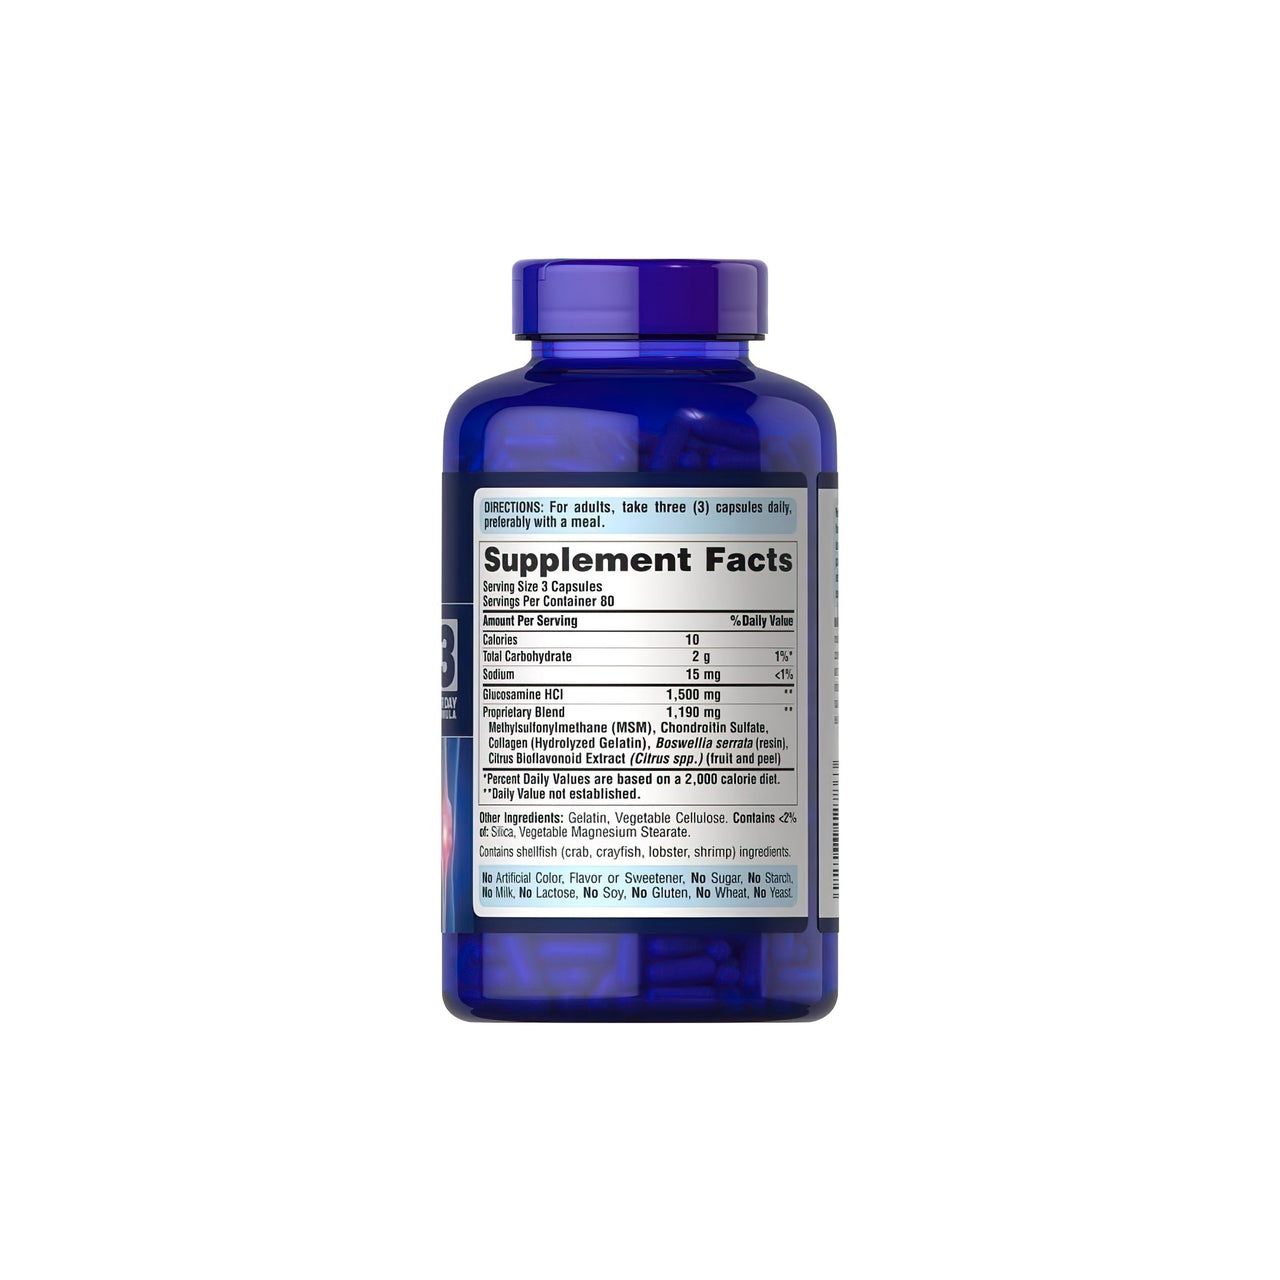 A bottle of Puritan's Pride Glucosamine Chondroitin MSM 240 capsules on a white background.